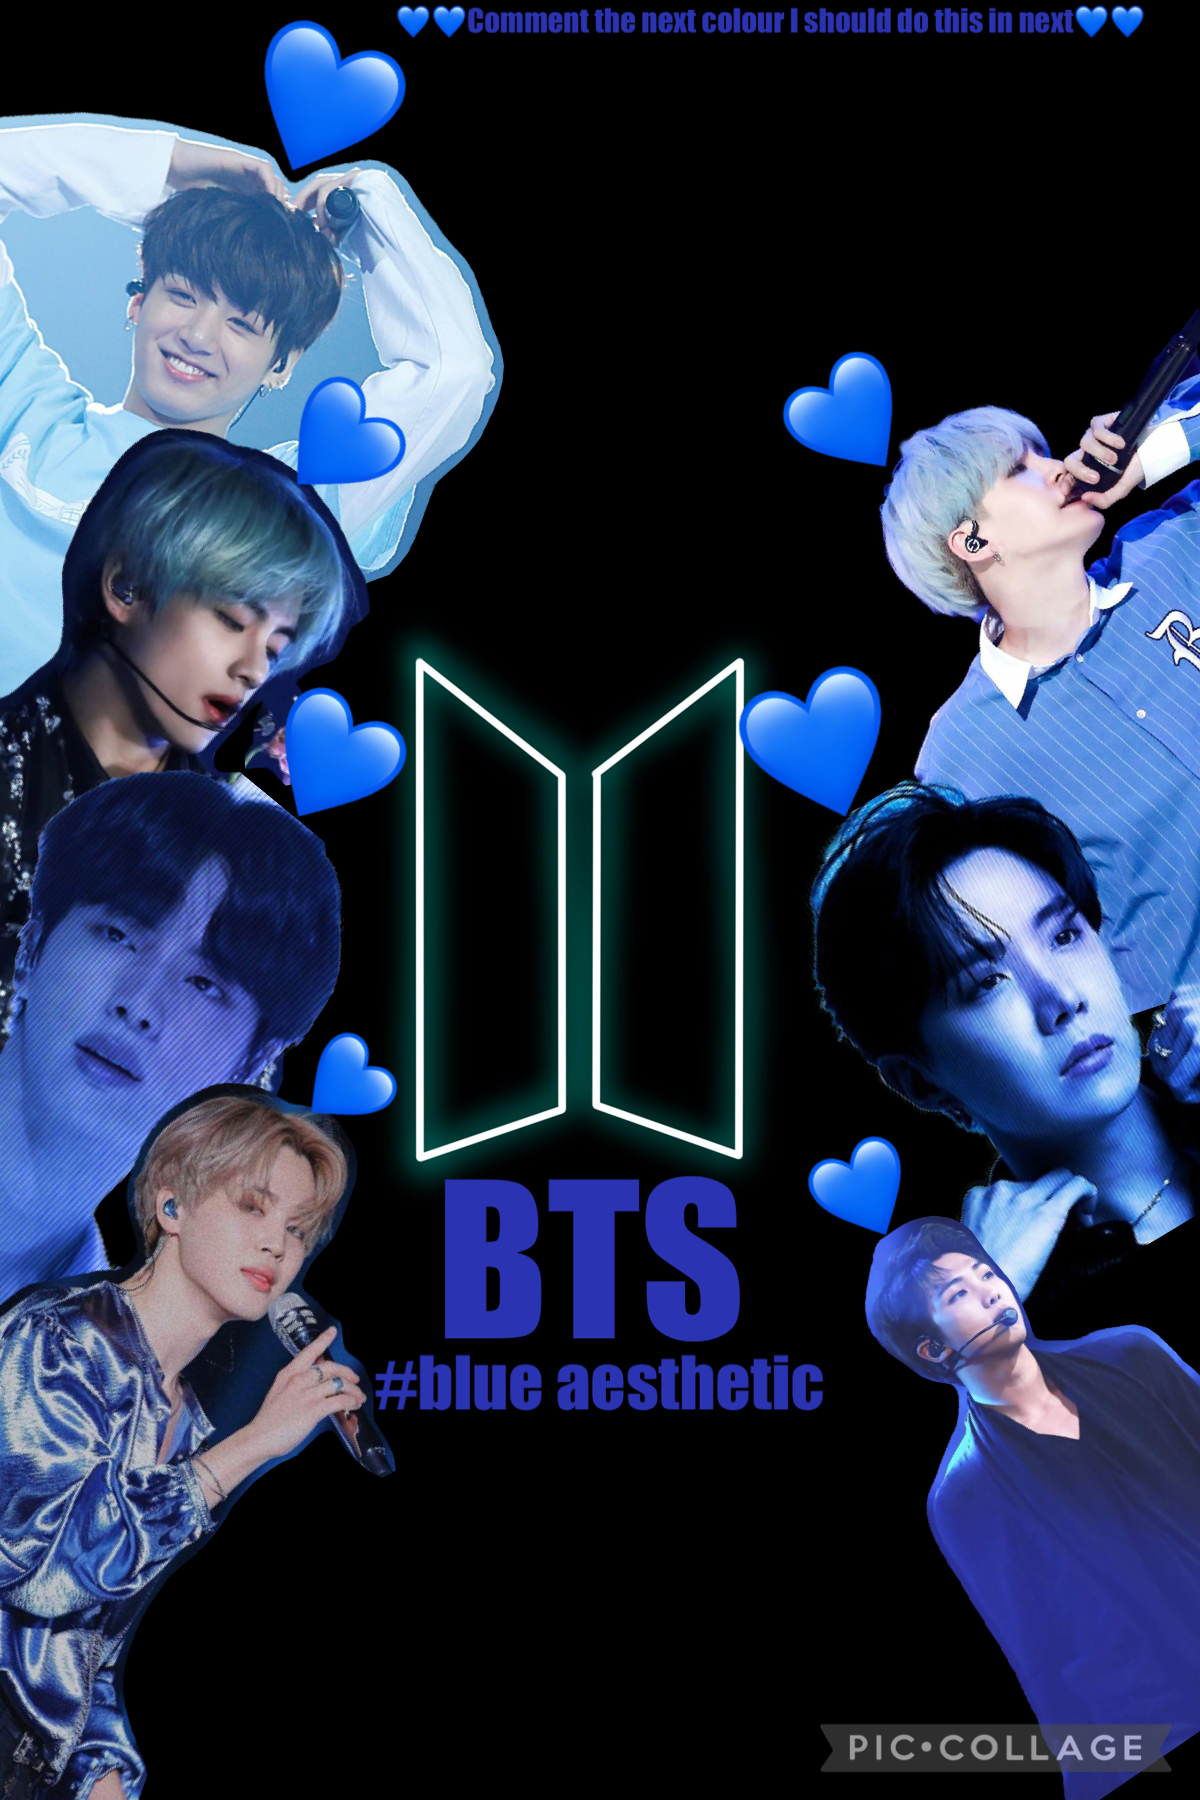 Tap
BTS~blue aesthetic 
Comment next colour I should use to make the next one like this